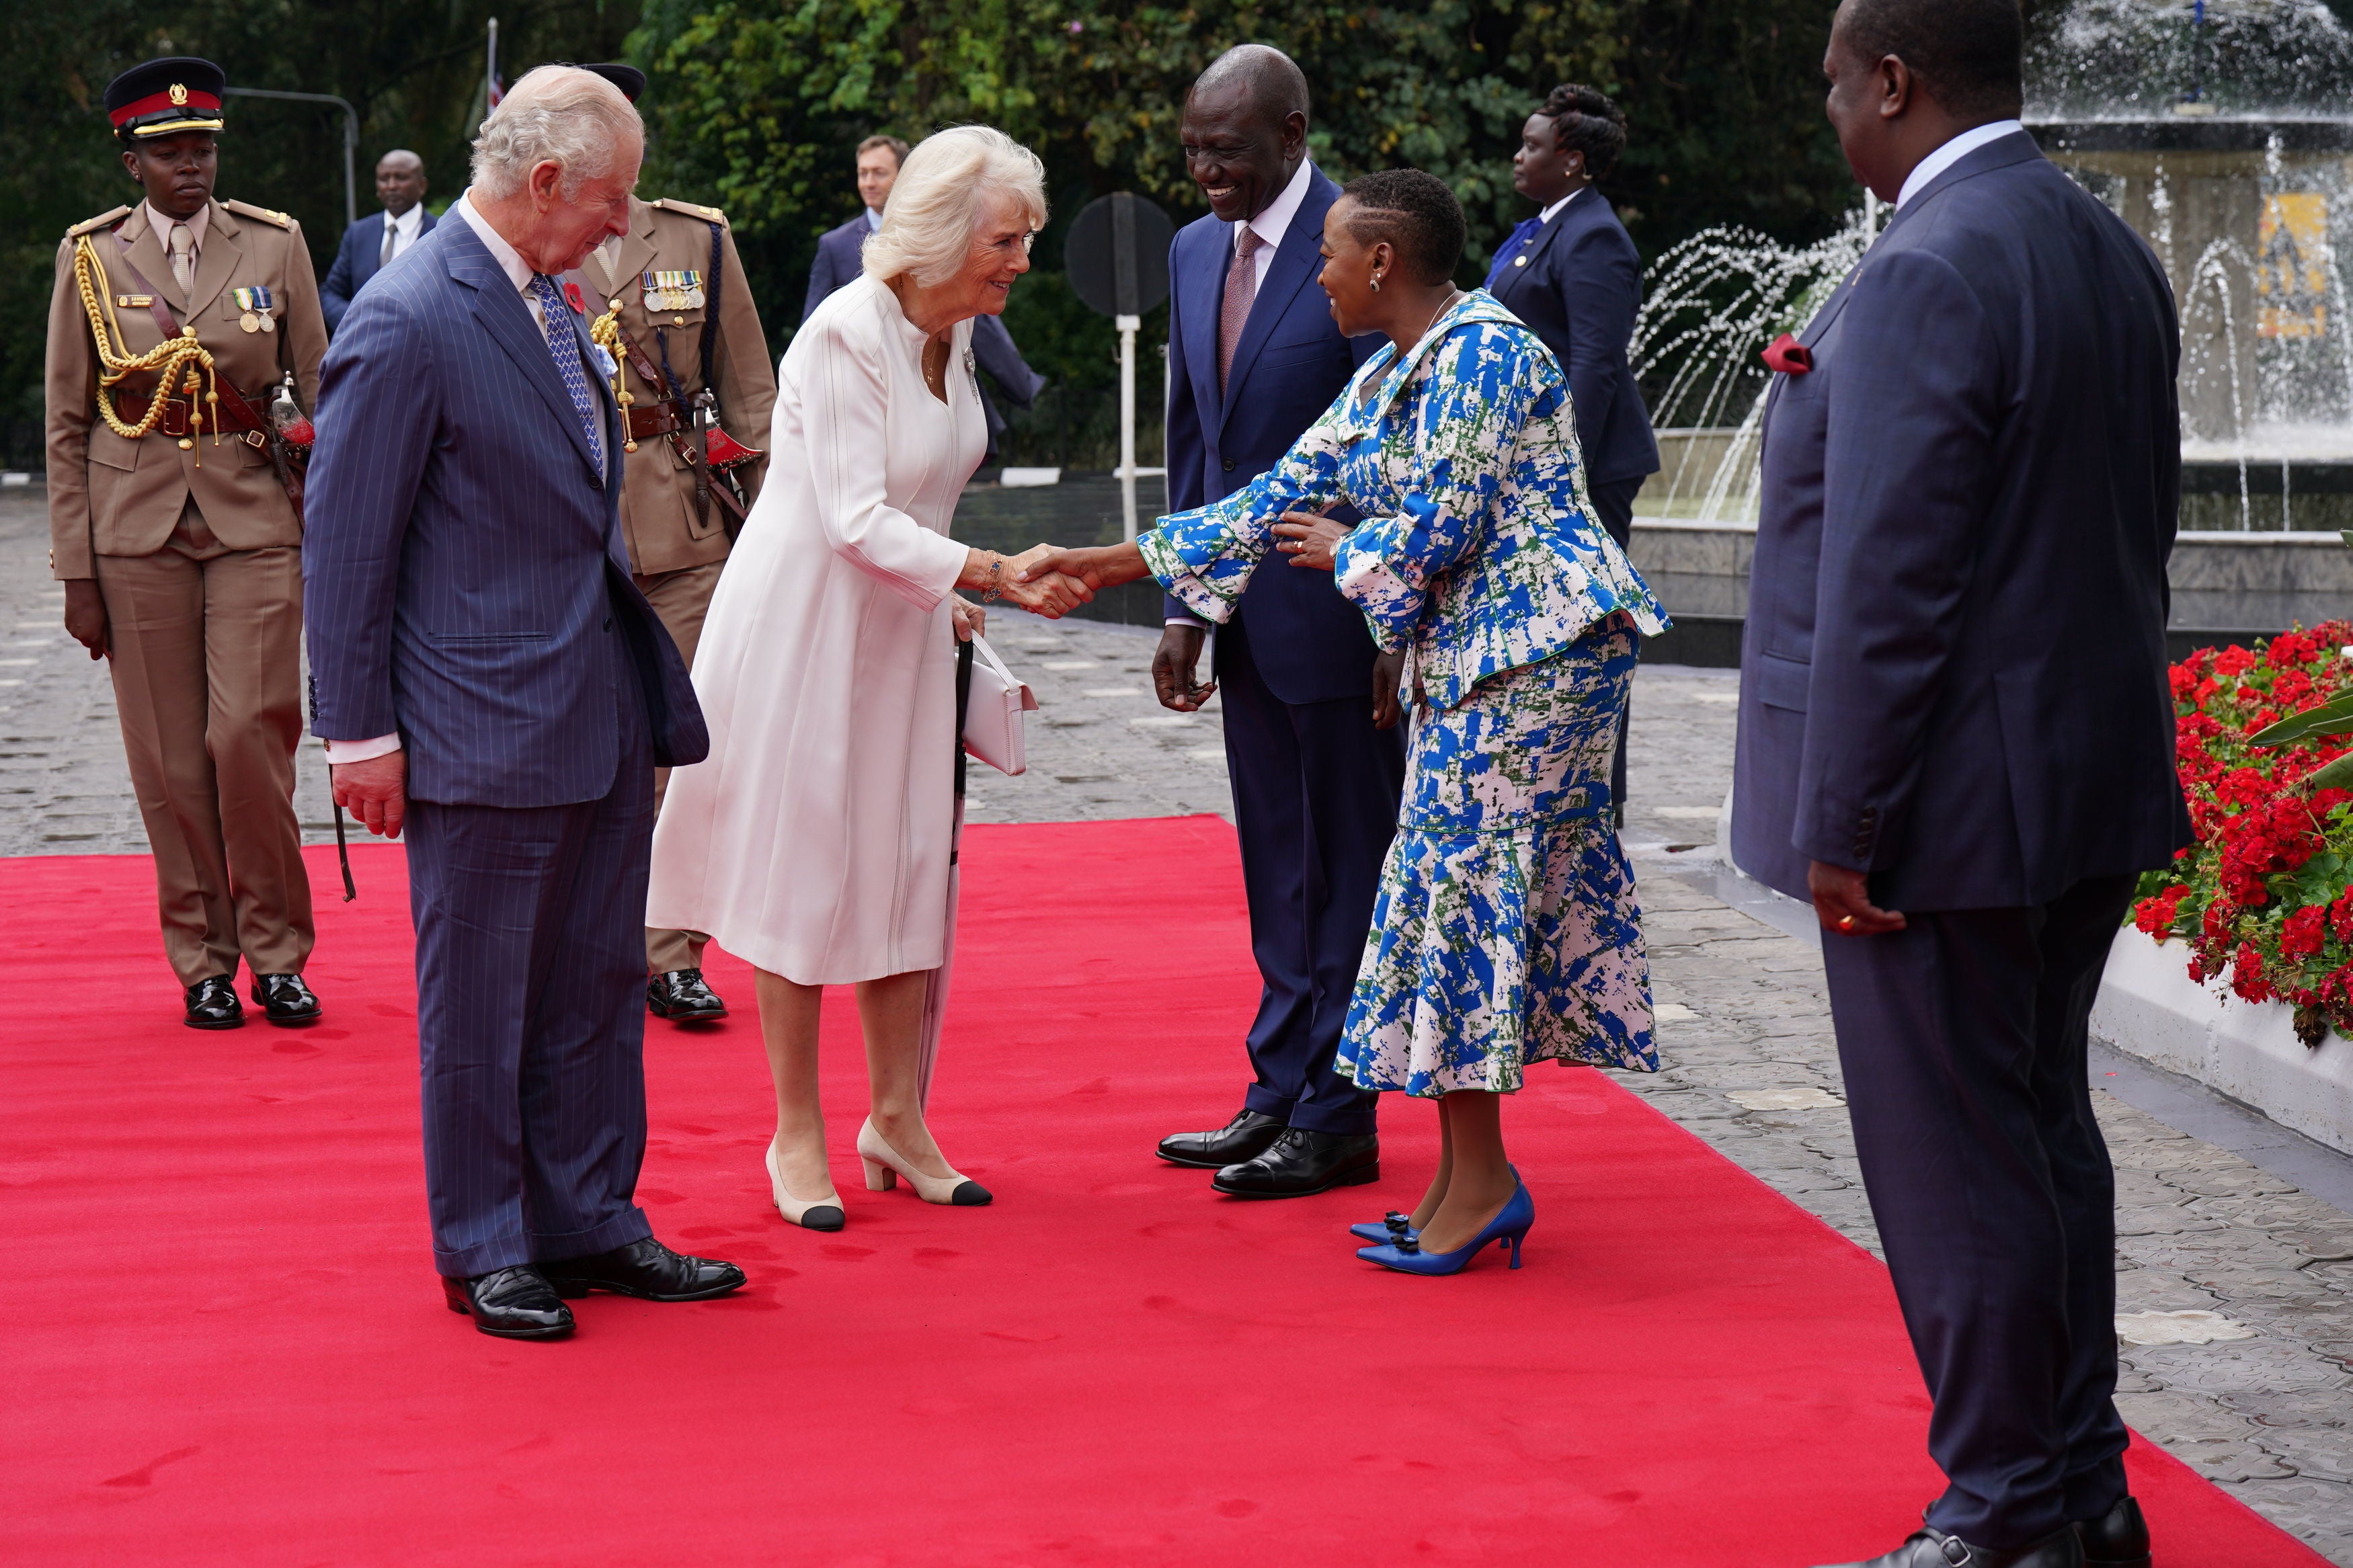 The royal couple are welcomed by Kenya’s president and his wife at the State House in Nairobi on Tuesday